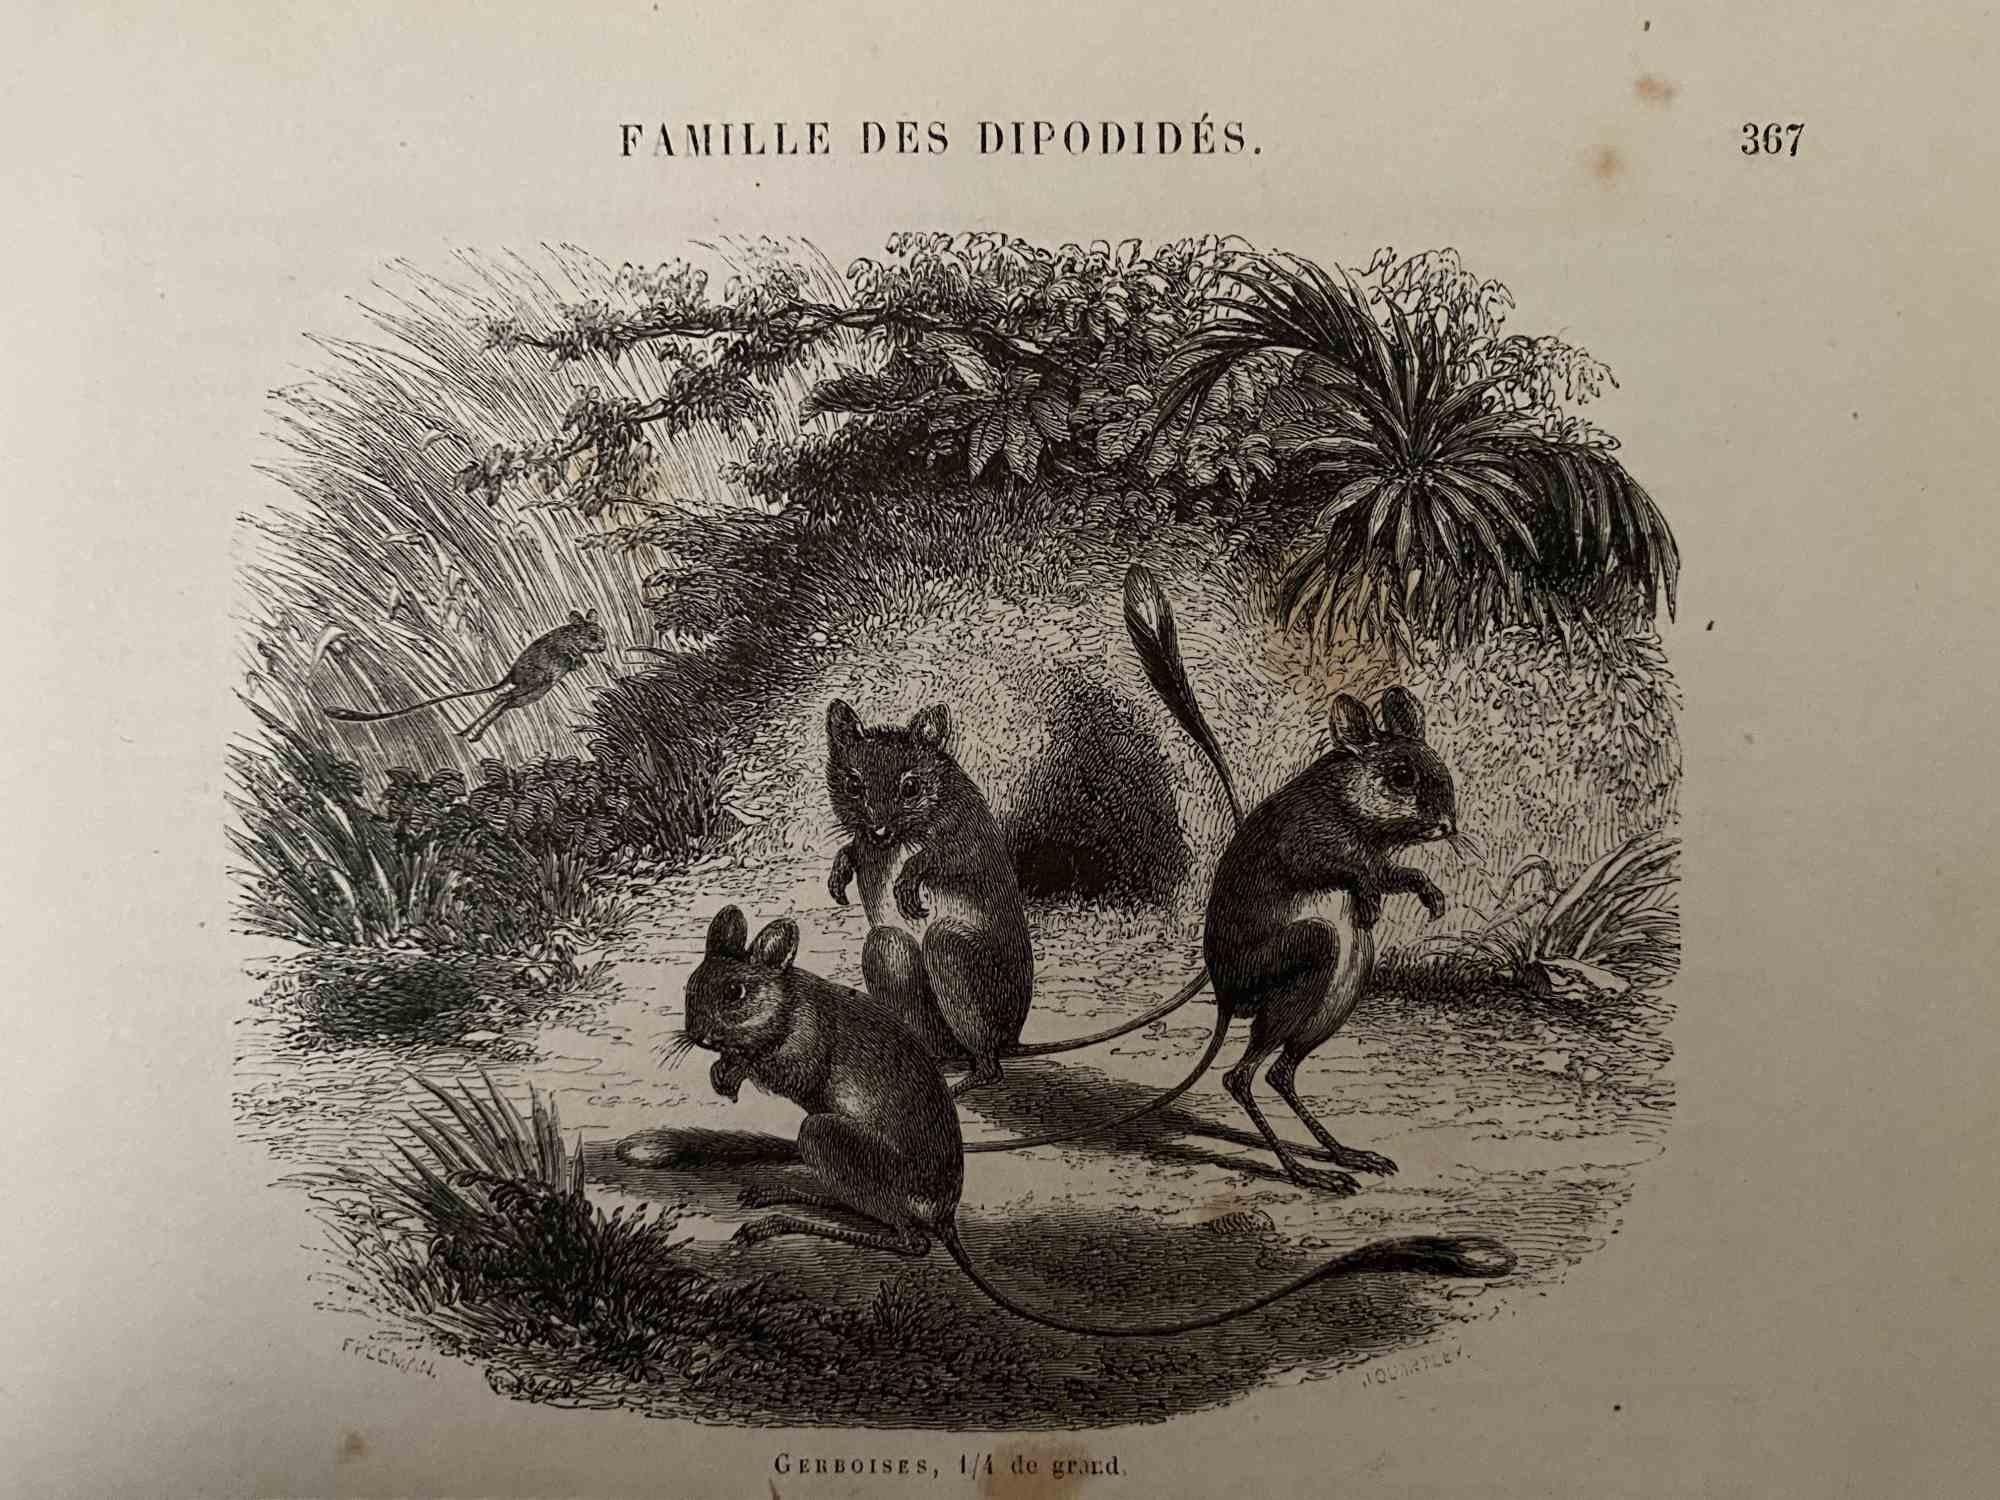 The Little Mouses is an original lithograph on ivory-colored paper, realized by Paul Gervais (1816-1879). The artwork is from The Series of "Les Trois Règnes de la Nature", and was published in 1854.

Good conditions.

Titled on the lower. With the